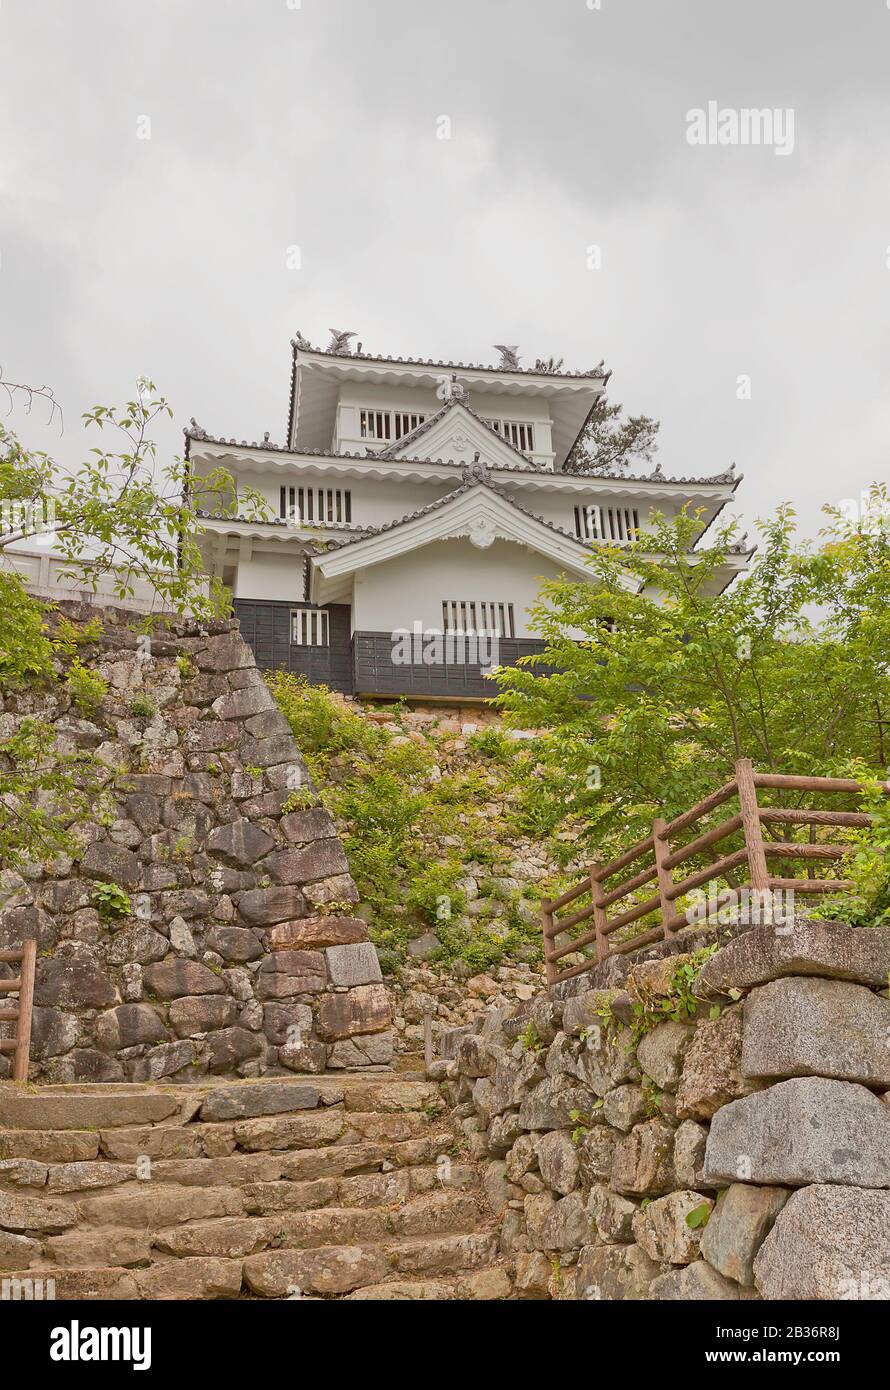 Main Keep (donjon) of Yoshida Castle, Japan. Castle was founded in 1505 by Makino Kohaku, destroyed in a fire in 1873 and reconstructed in 1954 Stock Photo